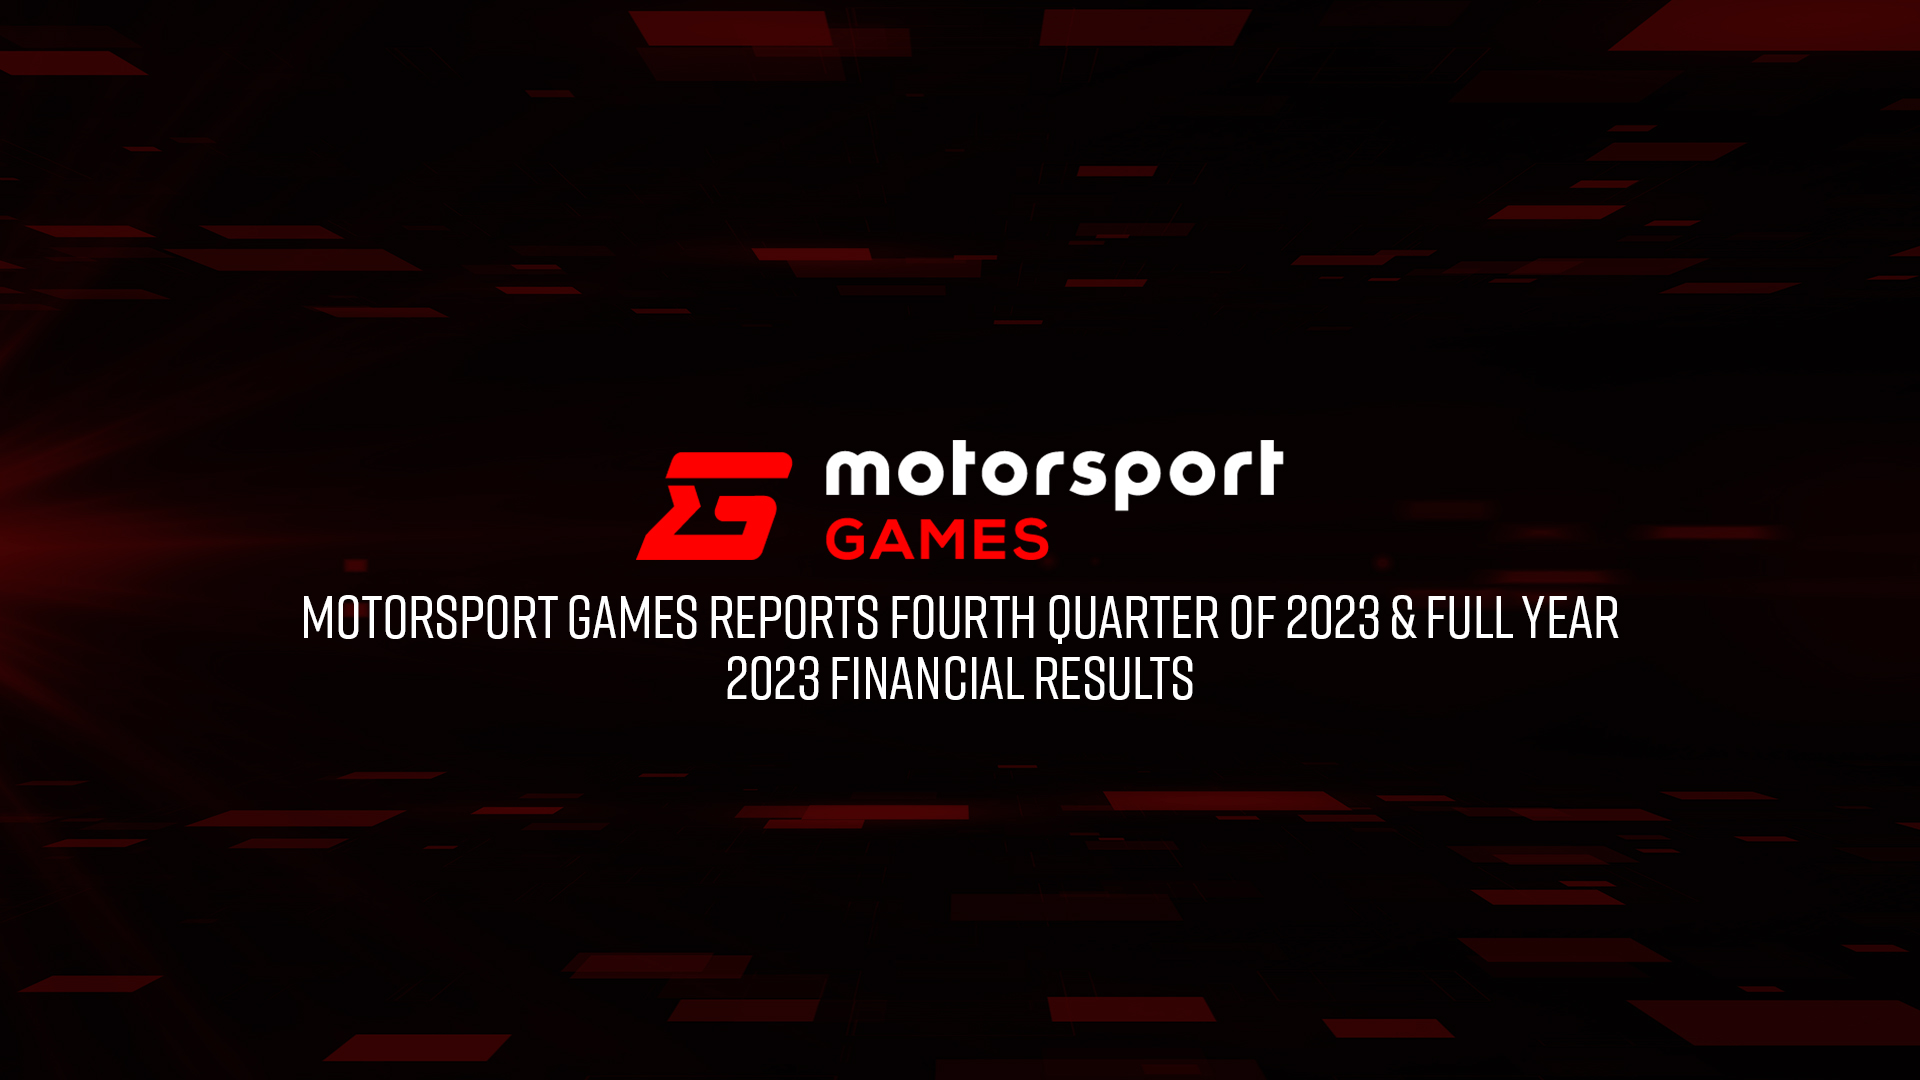 Motorsport Games Reports Fourth Quarter & Full Year 2023 Financial Results